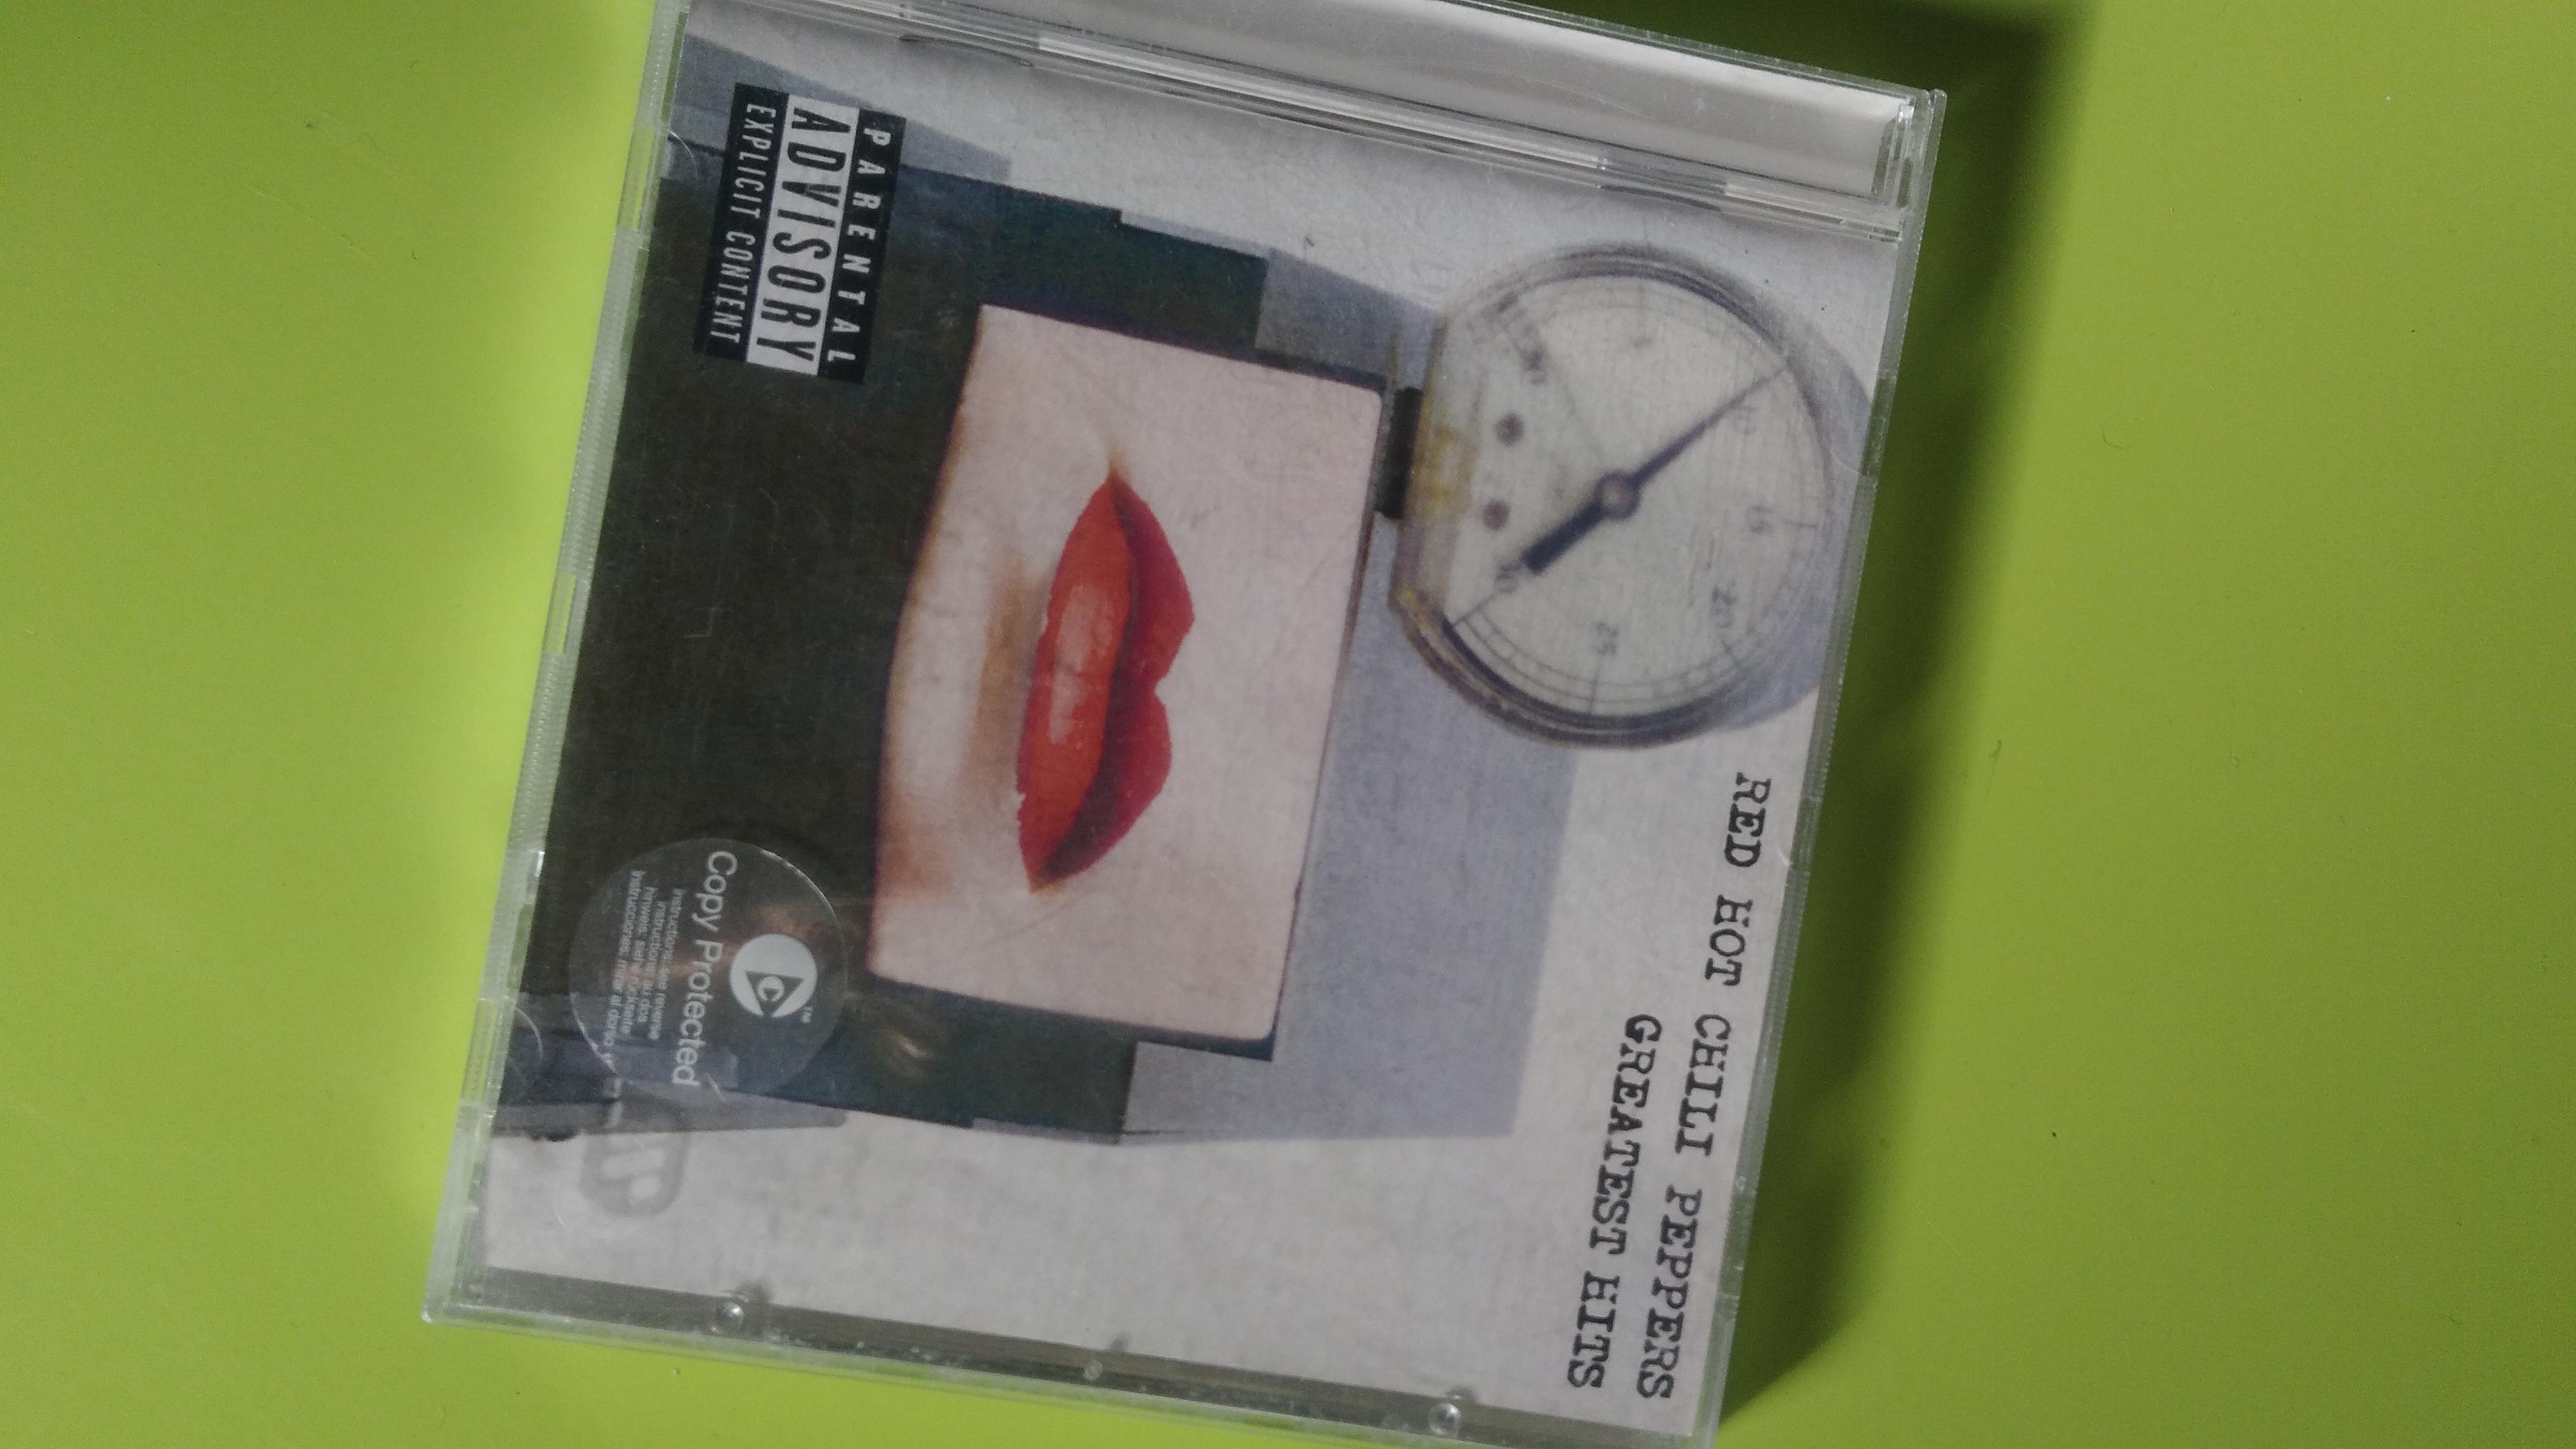 troc de troc cd best of red hot chili peppers image 0